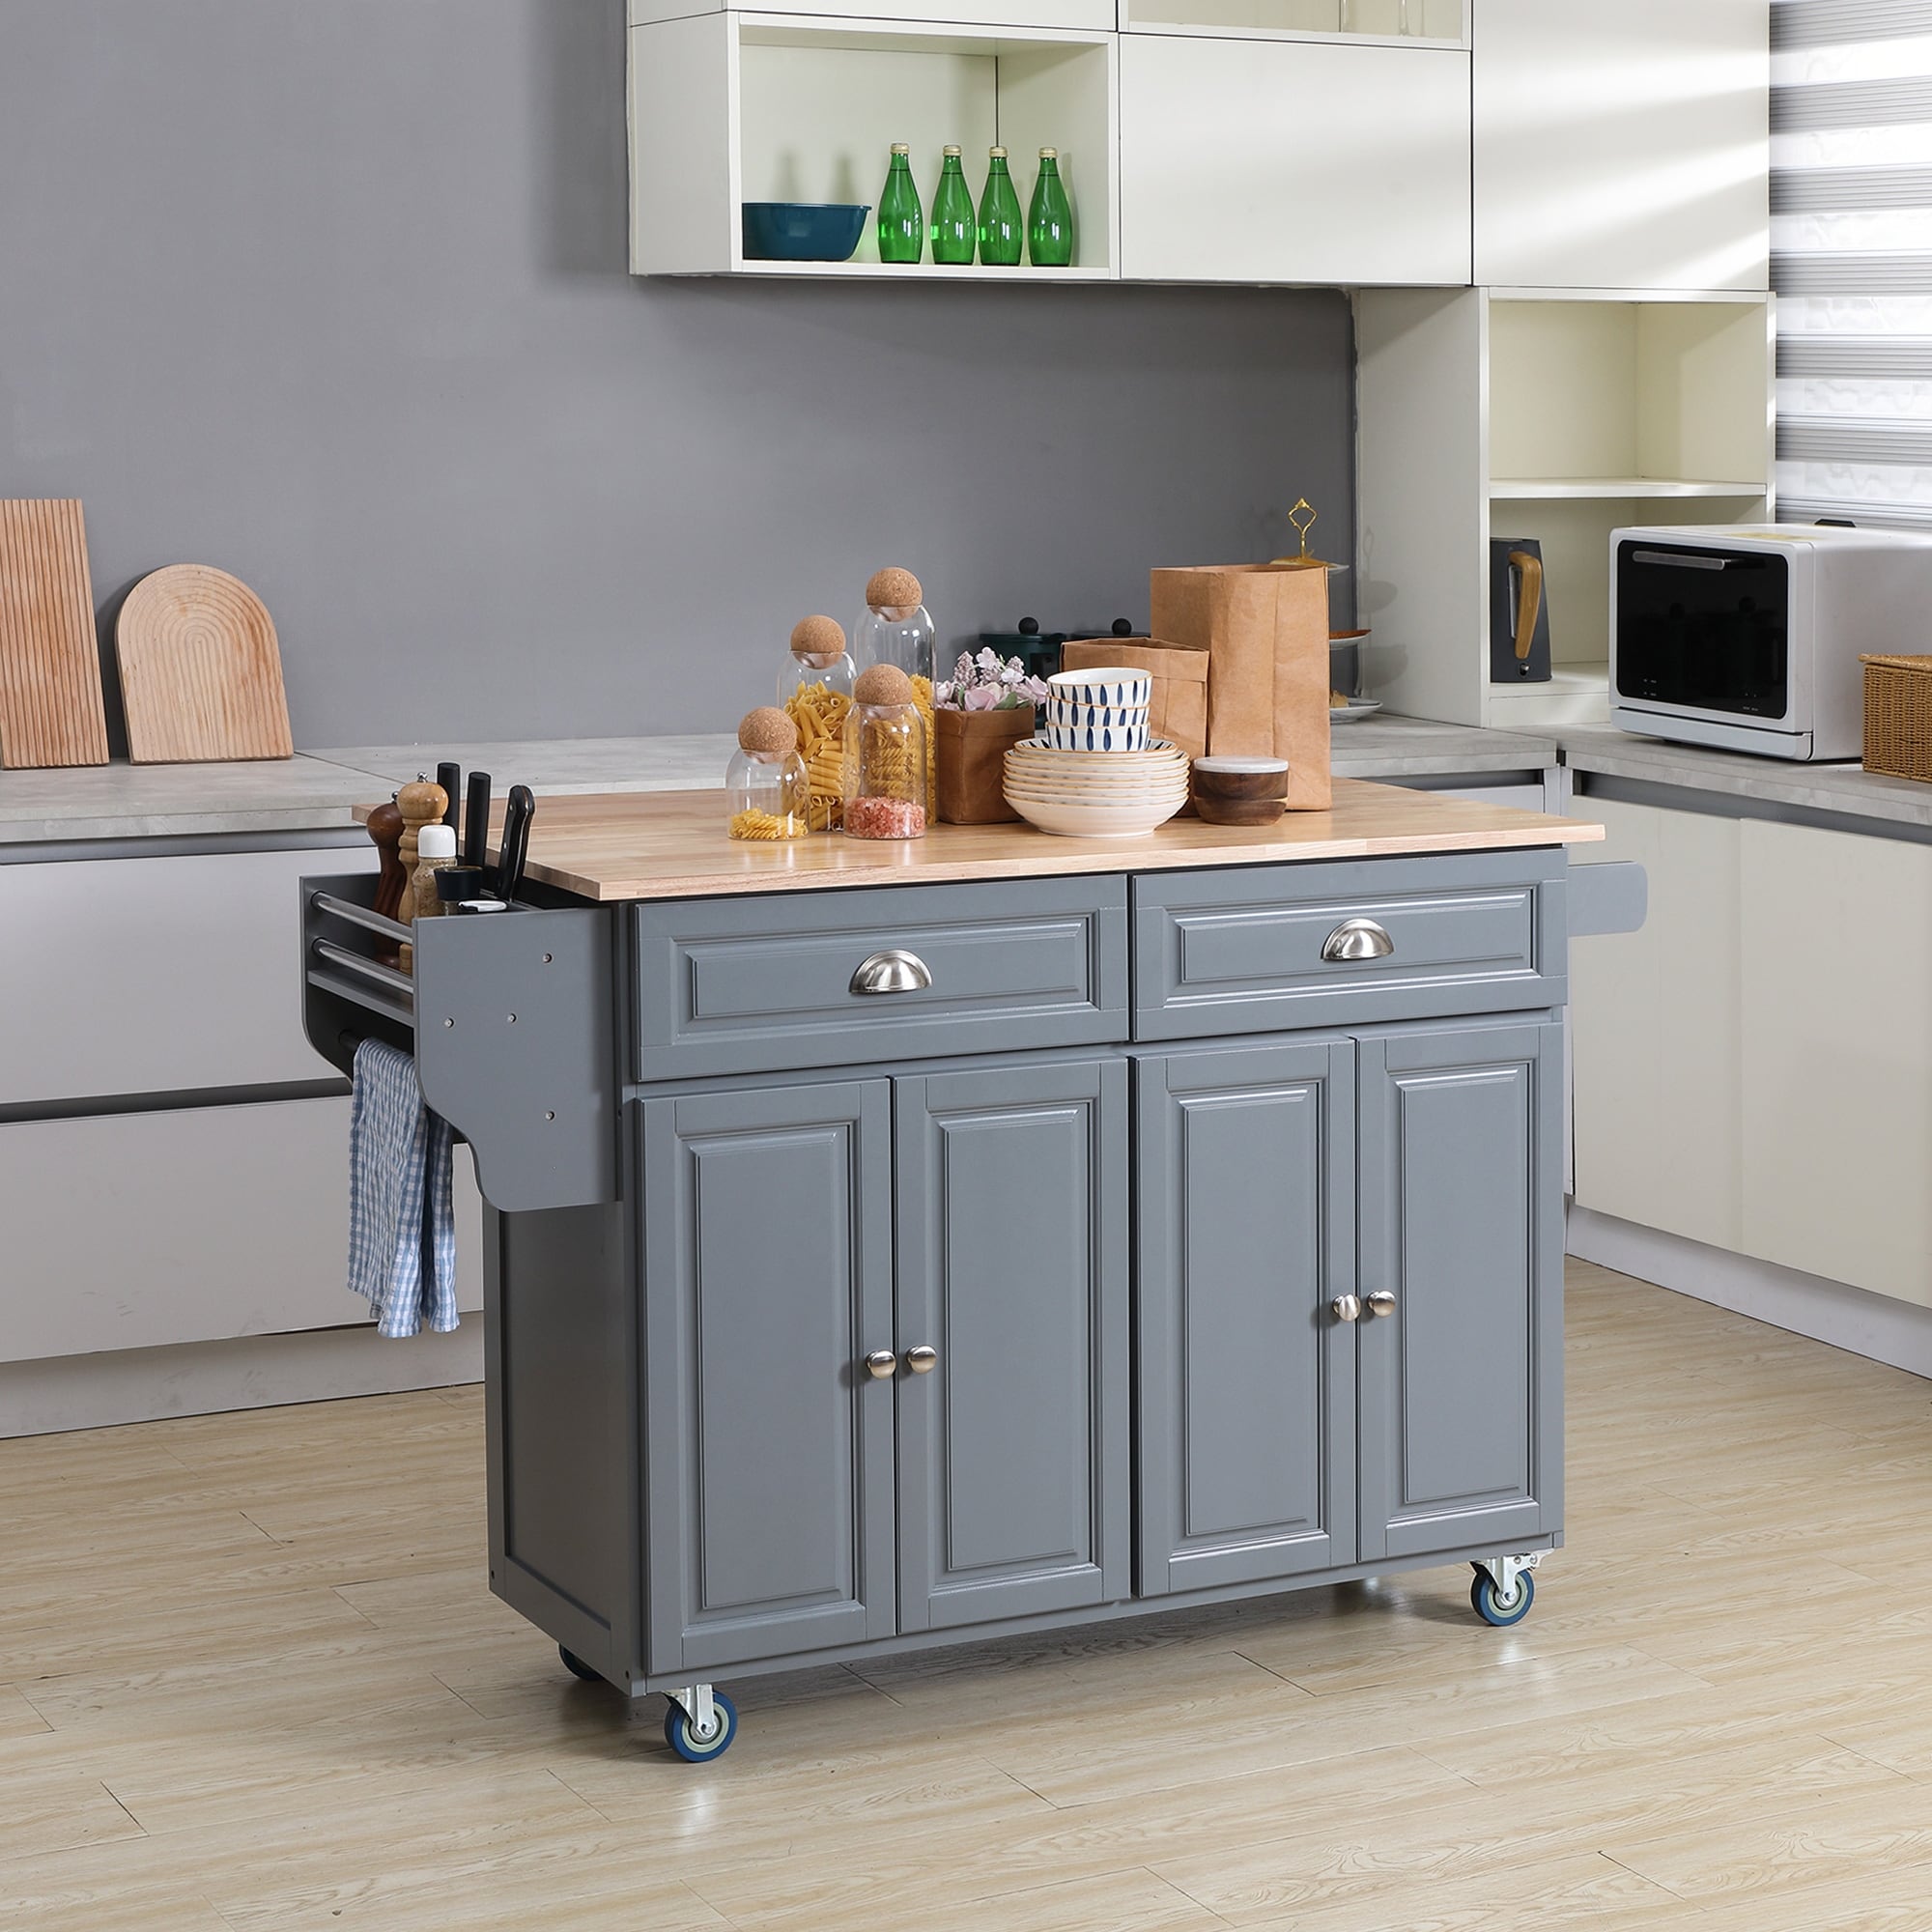 https://ak1.ostkcdn.com/images/products/is/images/direct/04f3ce18f7e5b6ac2522462bdc0adba94f39a1c1/HOMCOM-Rolling-Kitchen-Island-on-Wheels-Utility-Cart-with-Drop-Leaf-and-Rubber-Wood-Countertop%2C-Storage-Drawers%2C-Dark-Grey.jpg